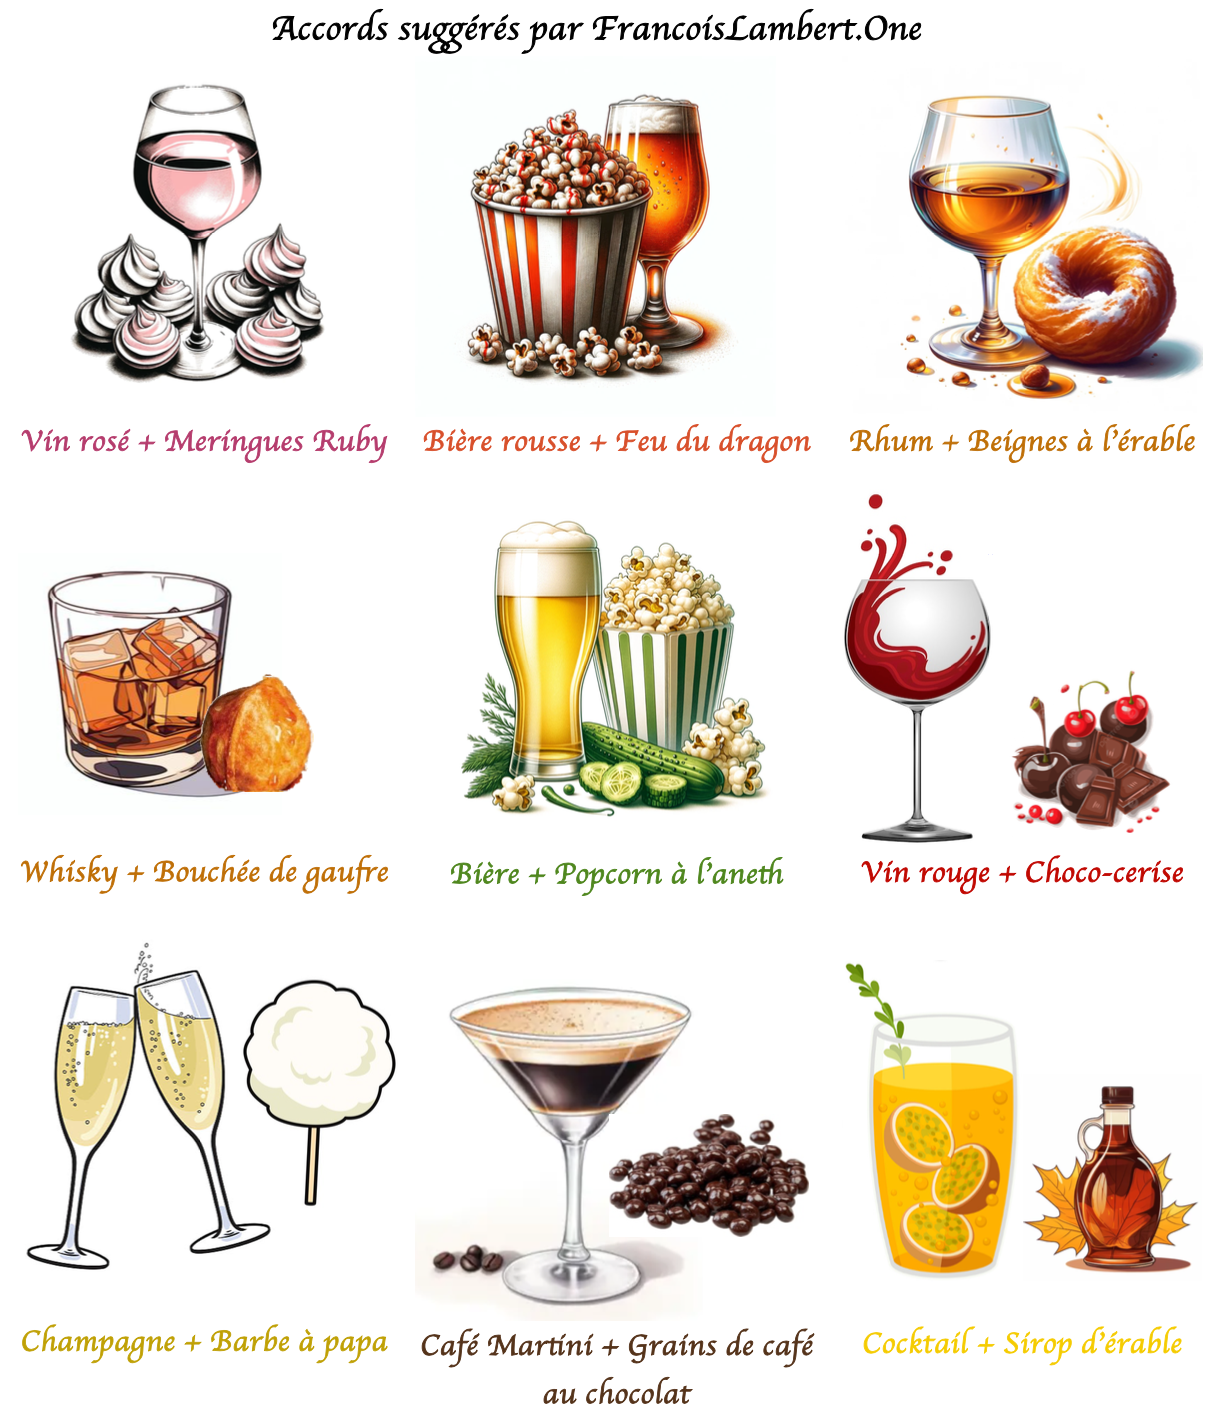 Pairings with alcohol